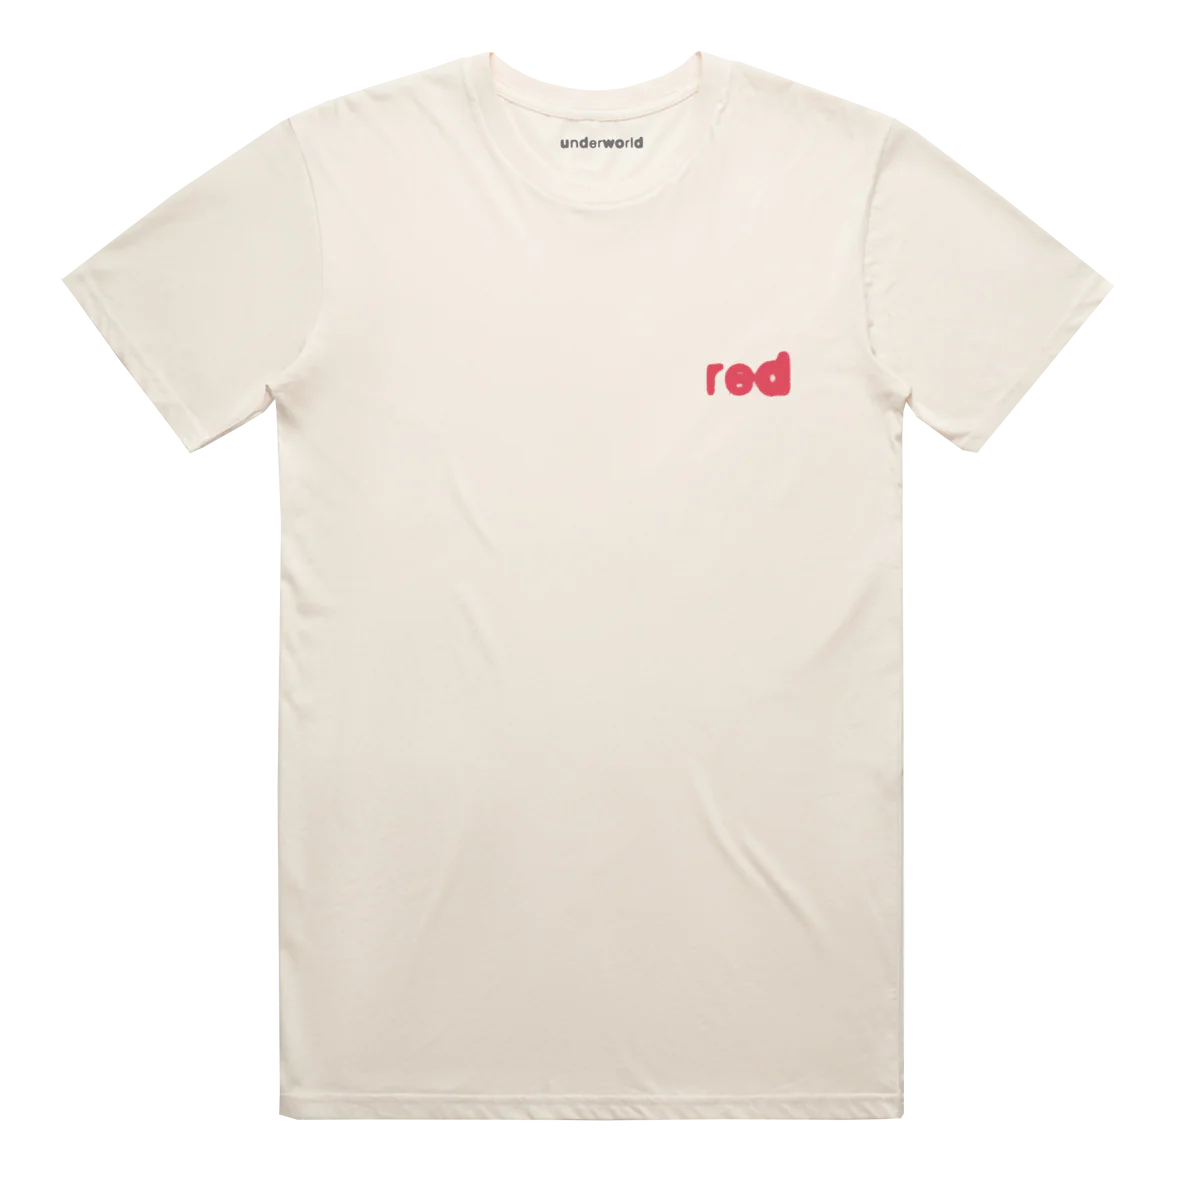 And The Colour Red Limited Drop * Sold Out! * - Underworld